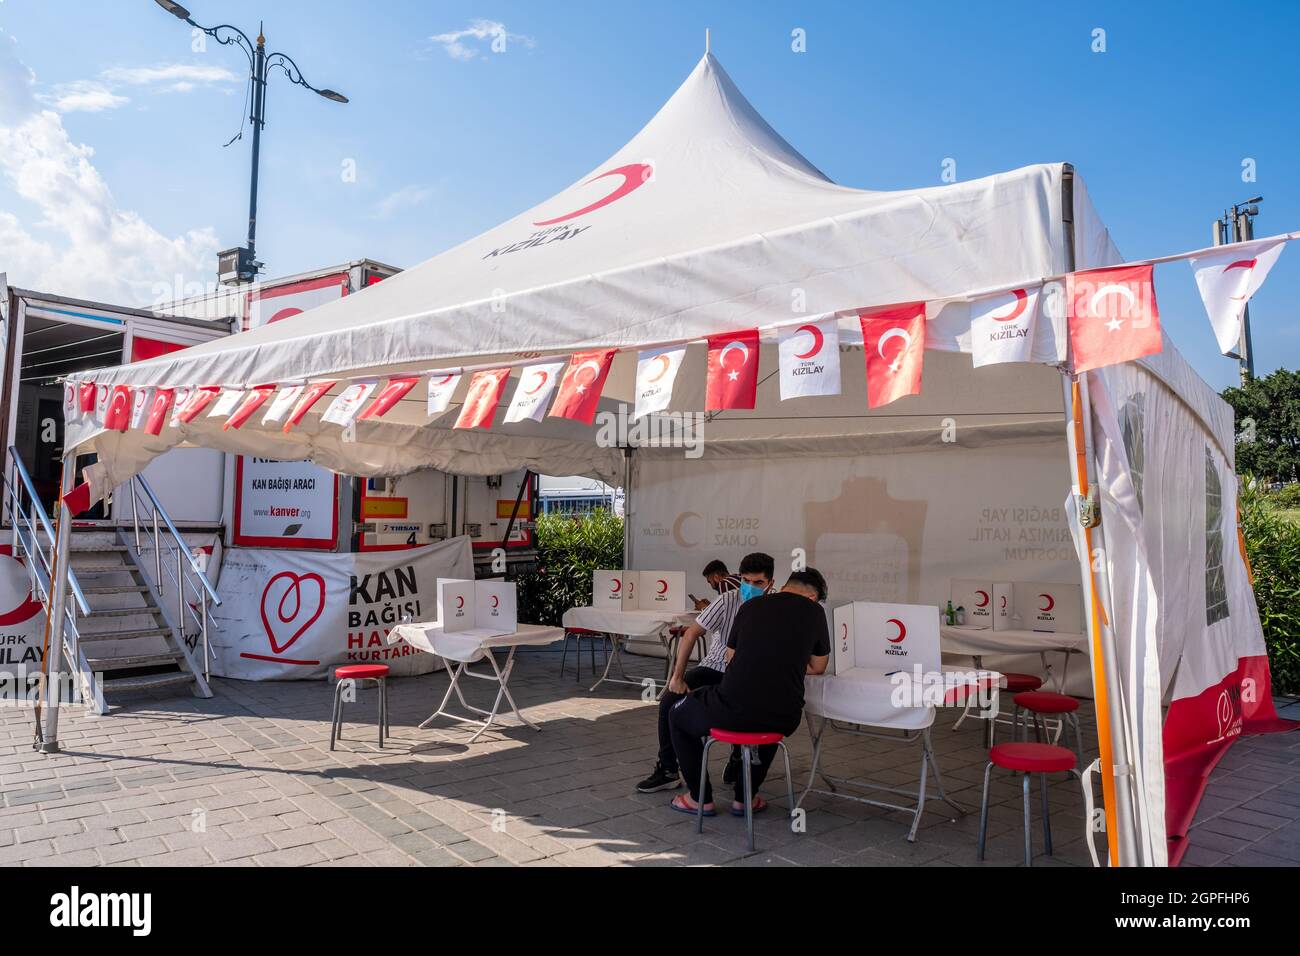 Eminonu, Istanbul, Turkey - 07.05.2021: tent of Turkish Red Crescent (Turk Kizilay) with Turkish flag and some volunteers sign the official approval d Stock Photo